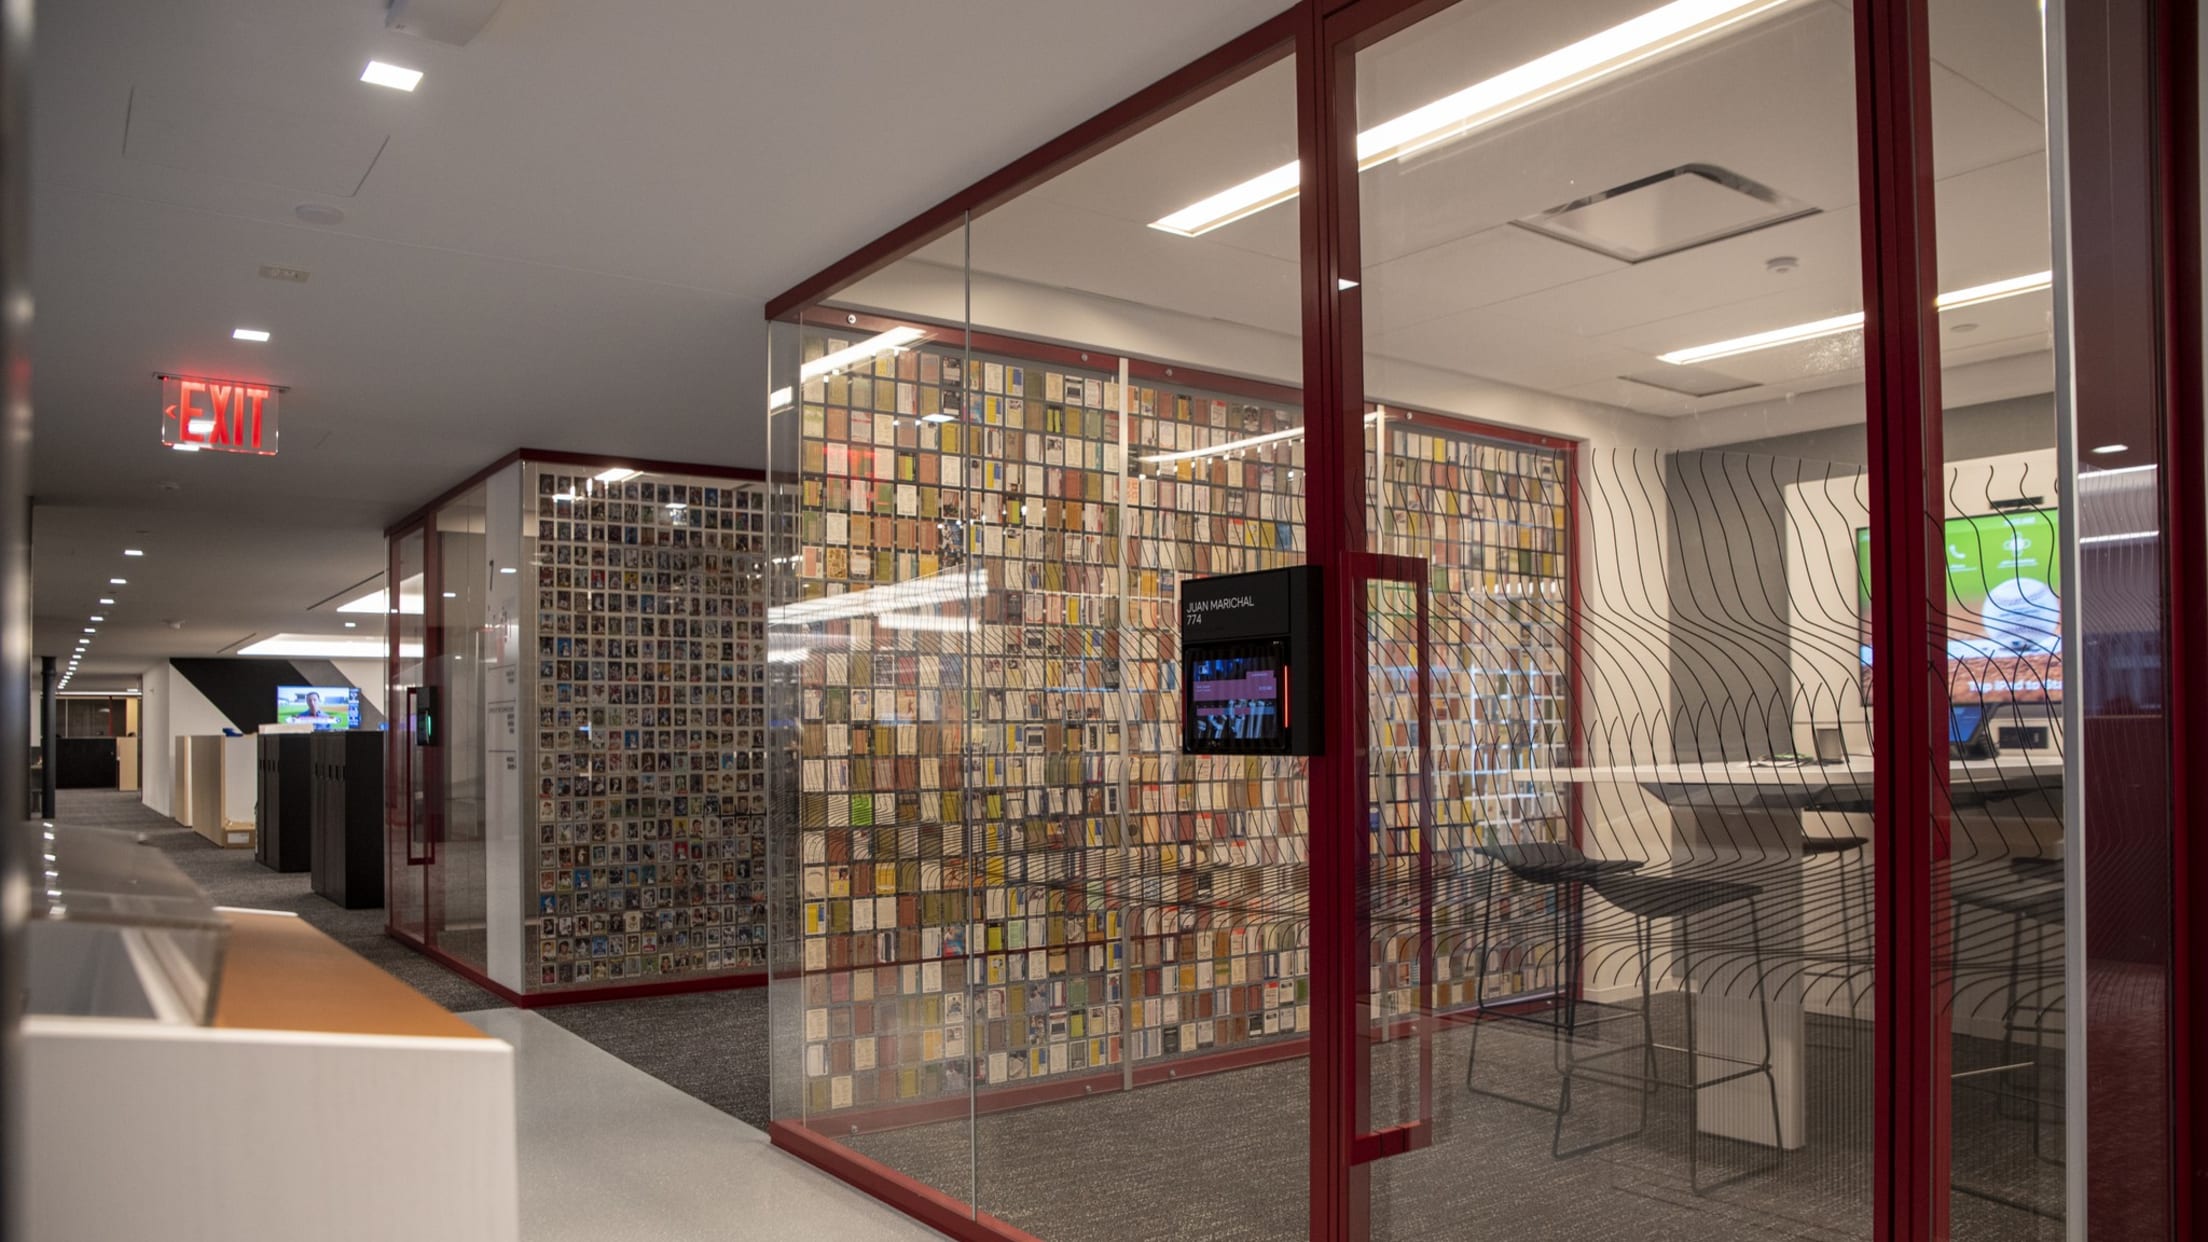 Studios Architecture's Major League Baseball Headquarters in Midtown Forges  a New Era for the Sport - Interior Design